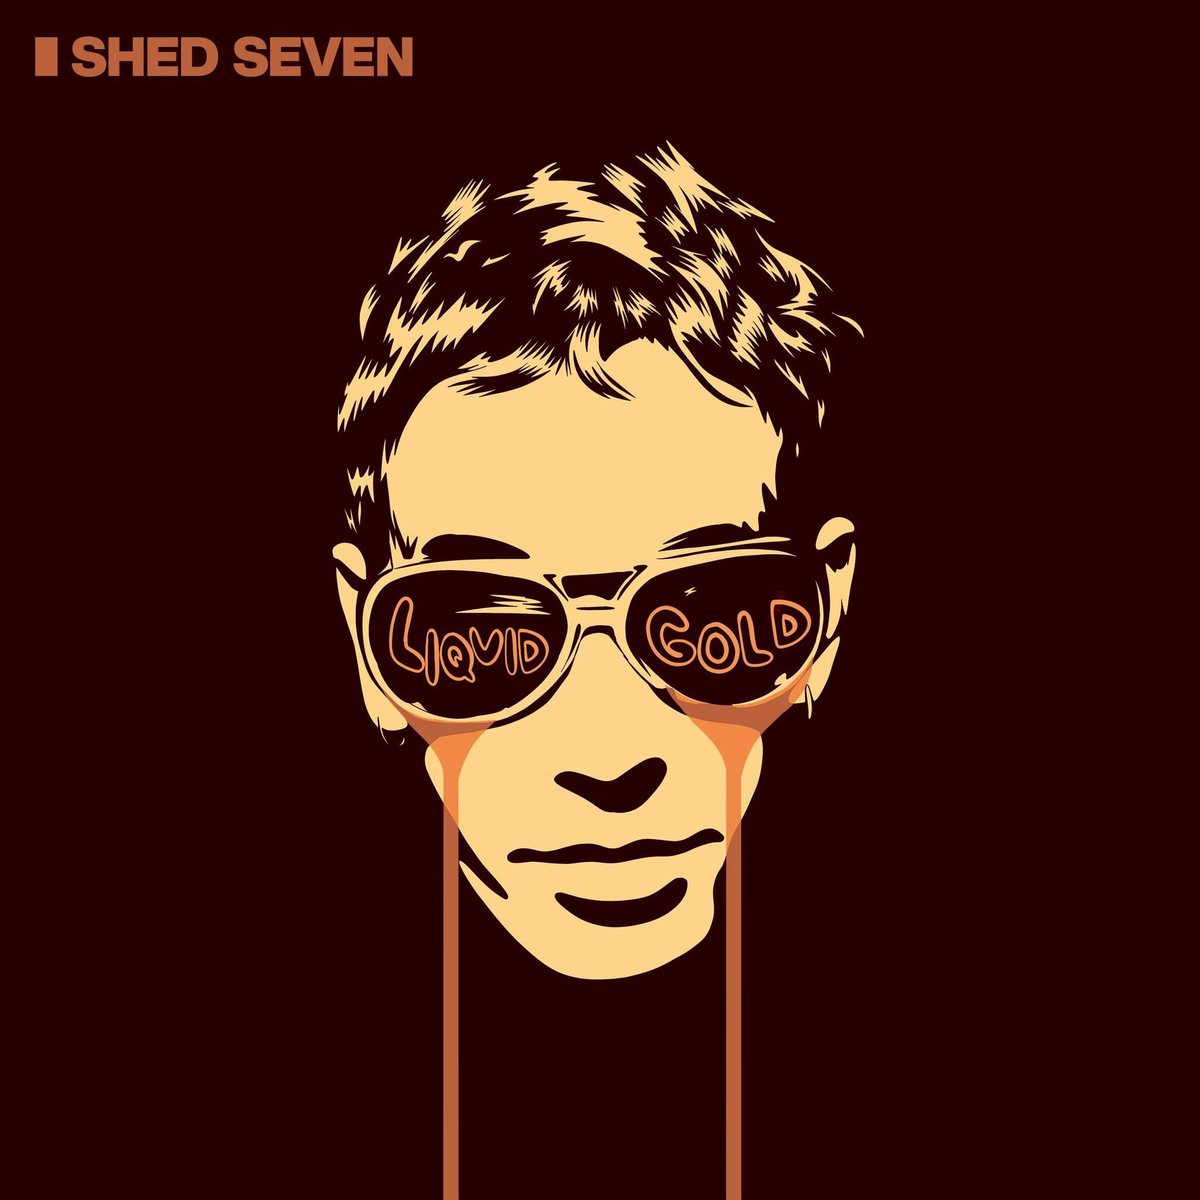 Introducing 'Liquid Gold', the new SHED SEVEN album - coming on 27th September. Stoked to have been asked to do the artwork for this..

shedsevenn.lnk.to/LiquidGold 

You can also hear the first taster from the album “Devil In Your Shoes”, streaming NOW.